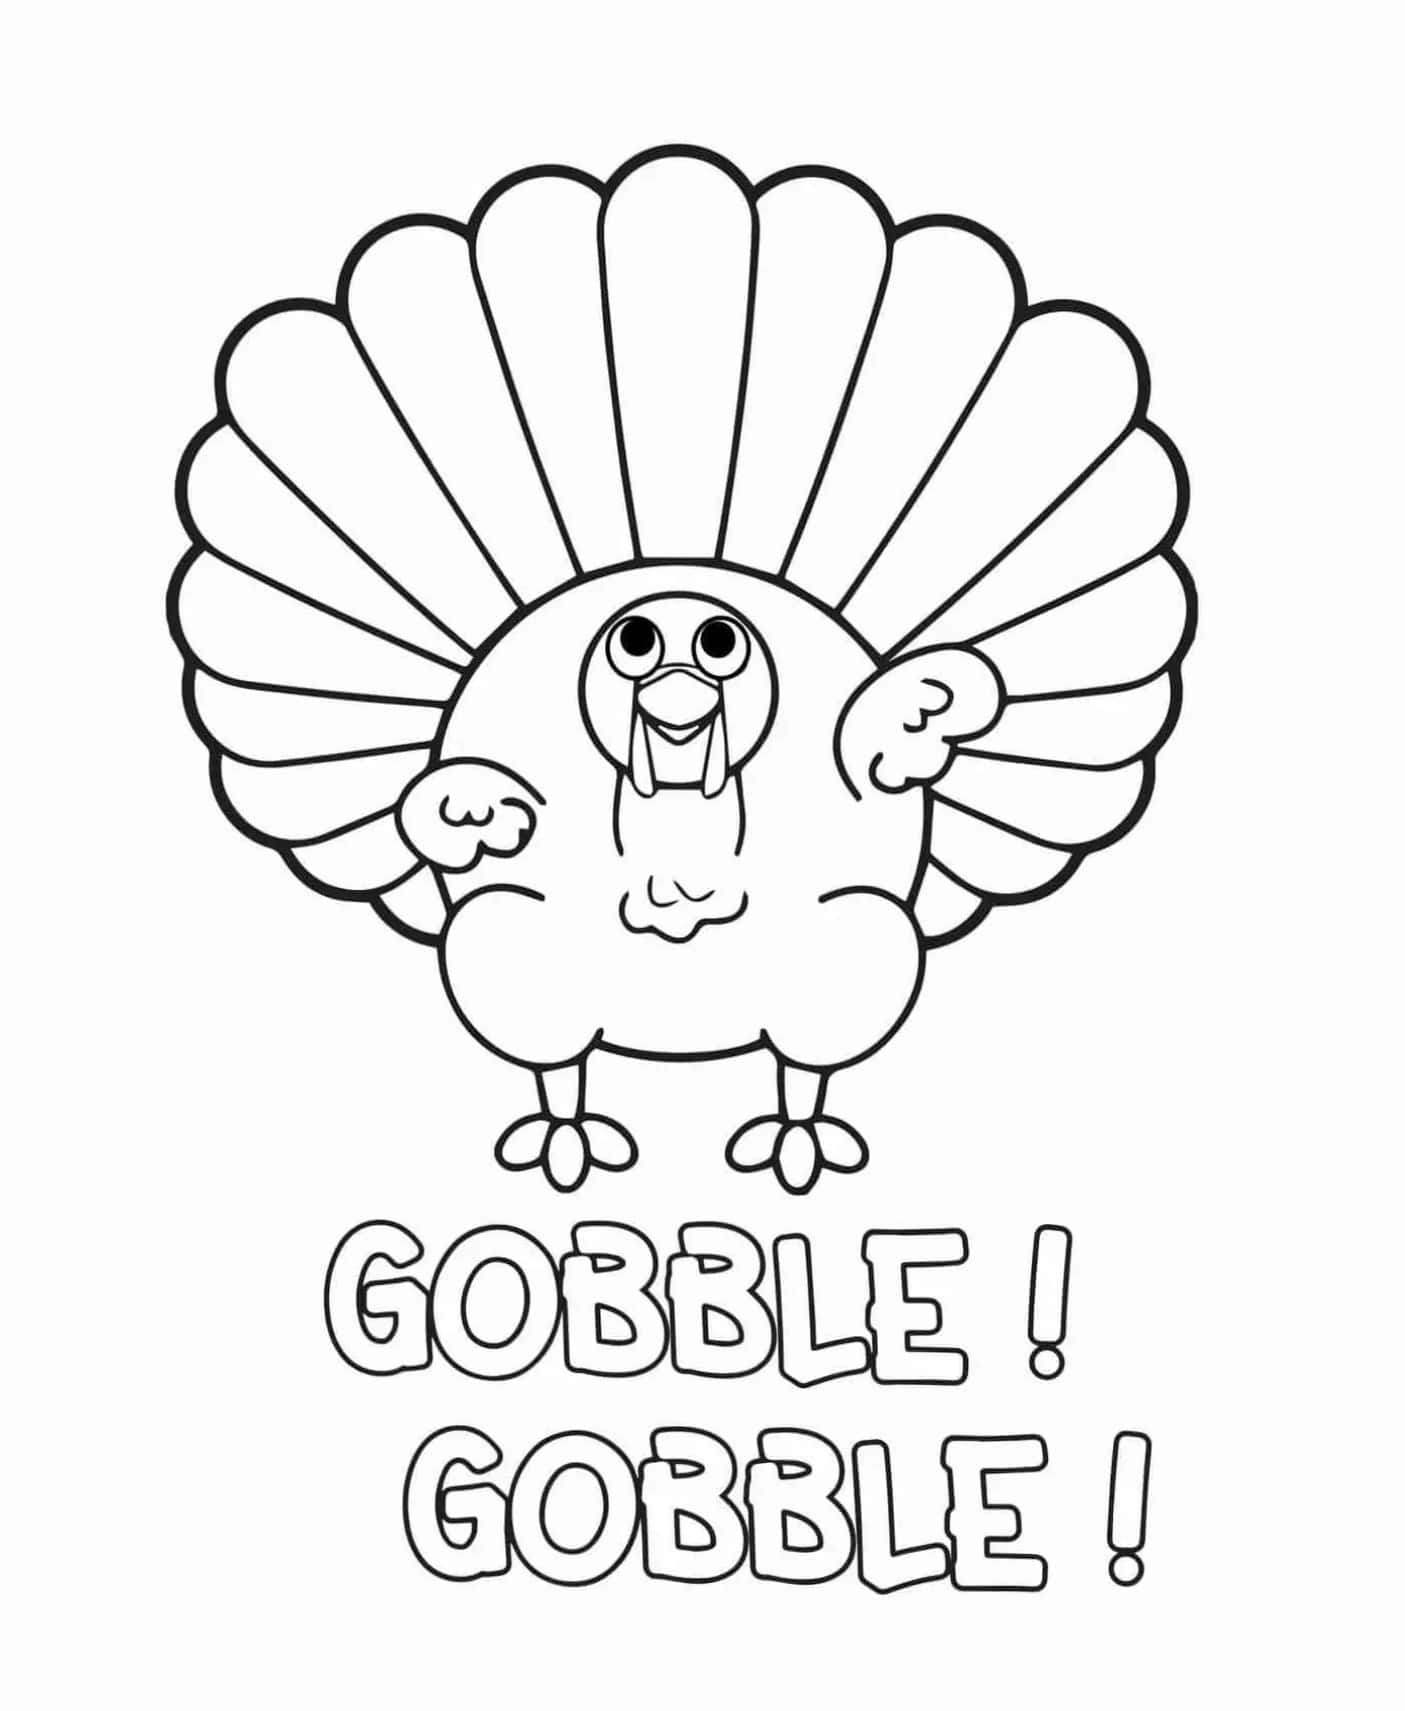 cute thanksgiving turkey coloring pages